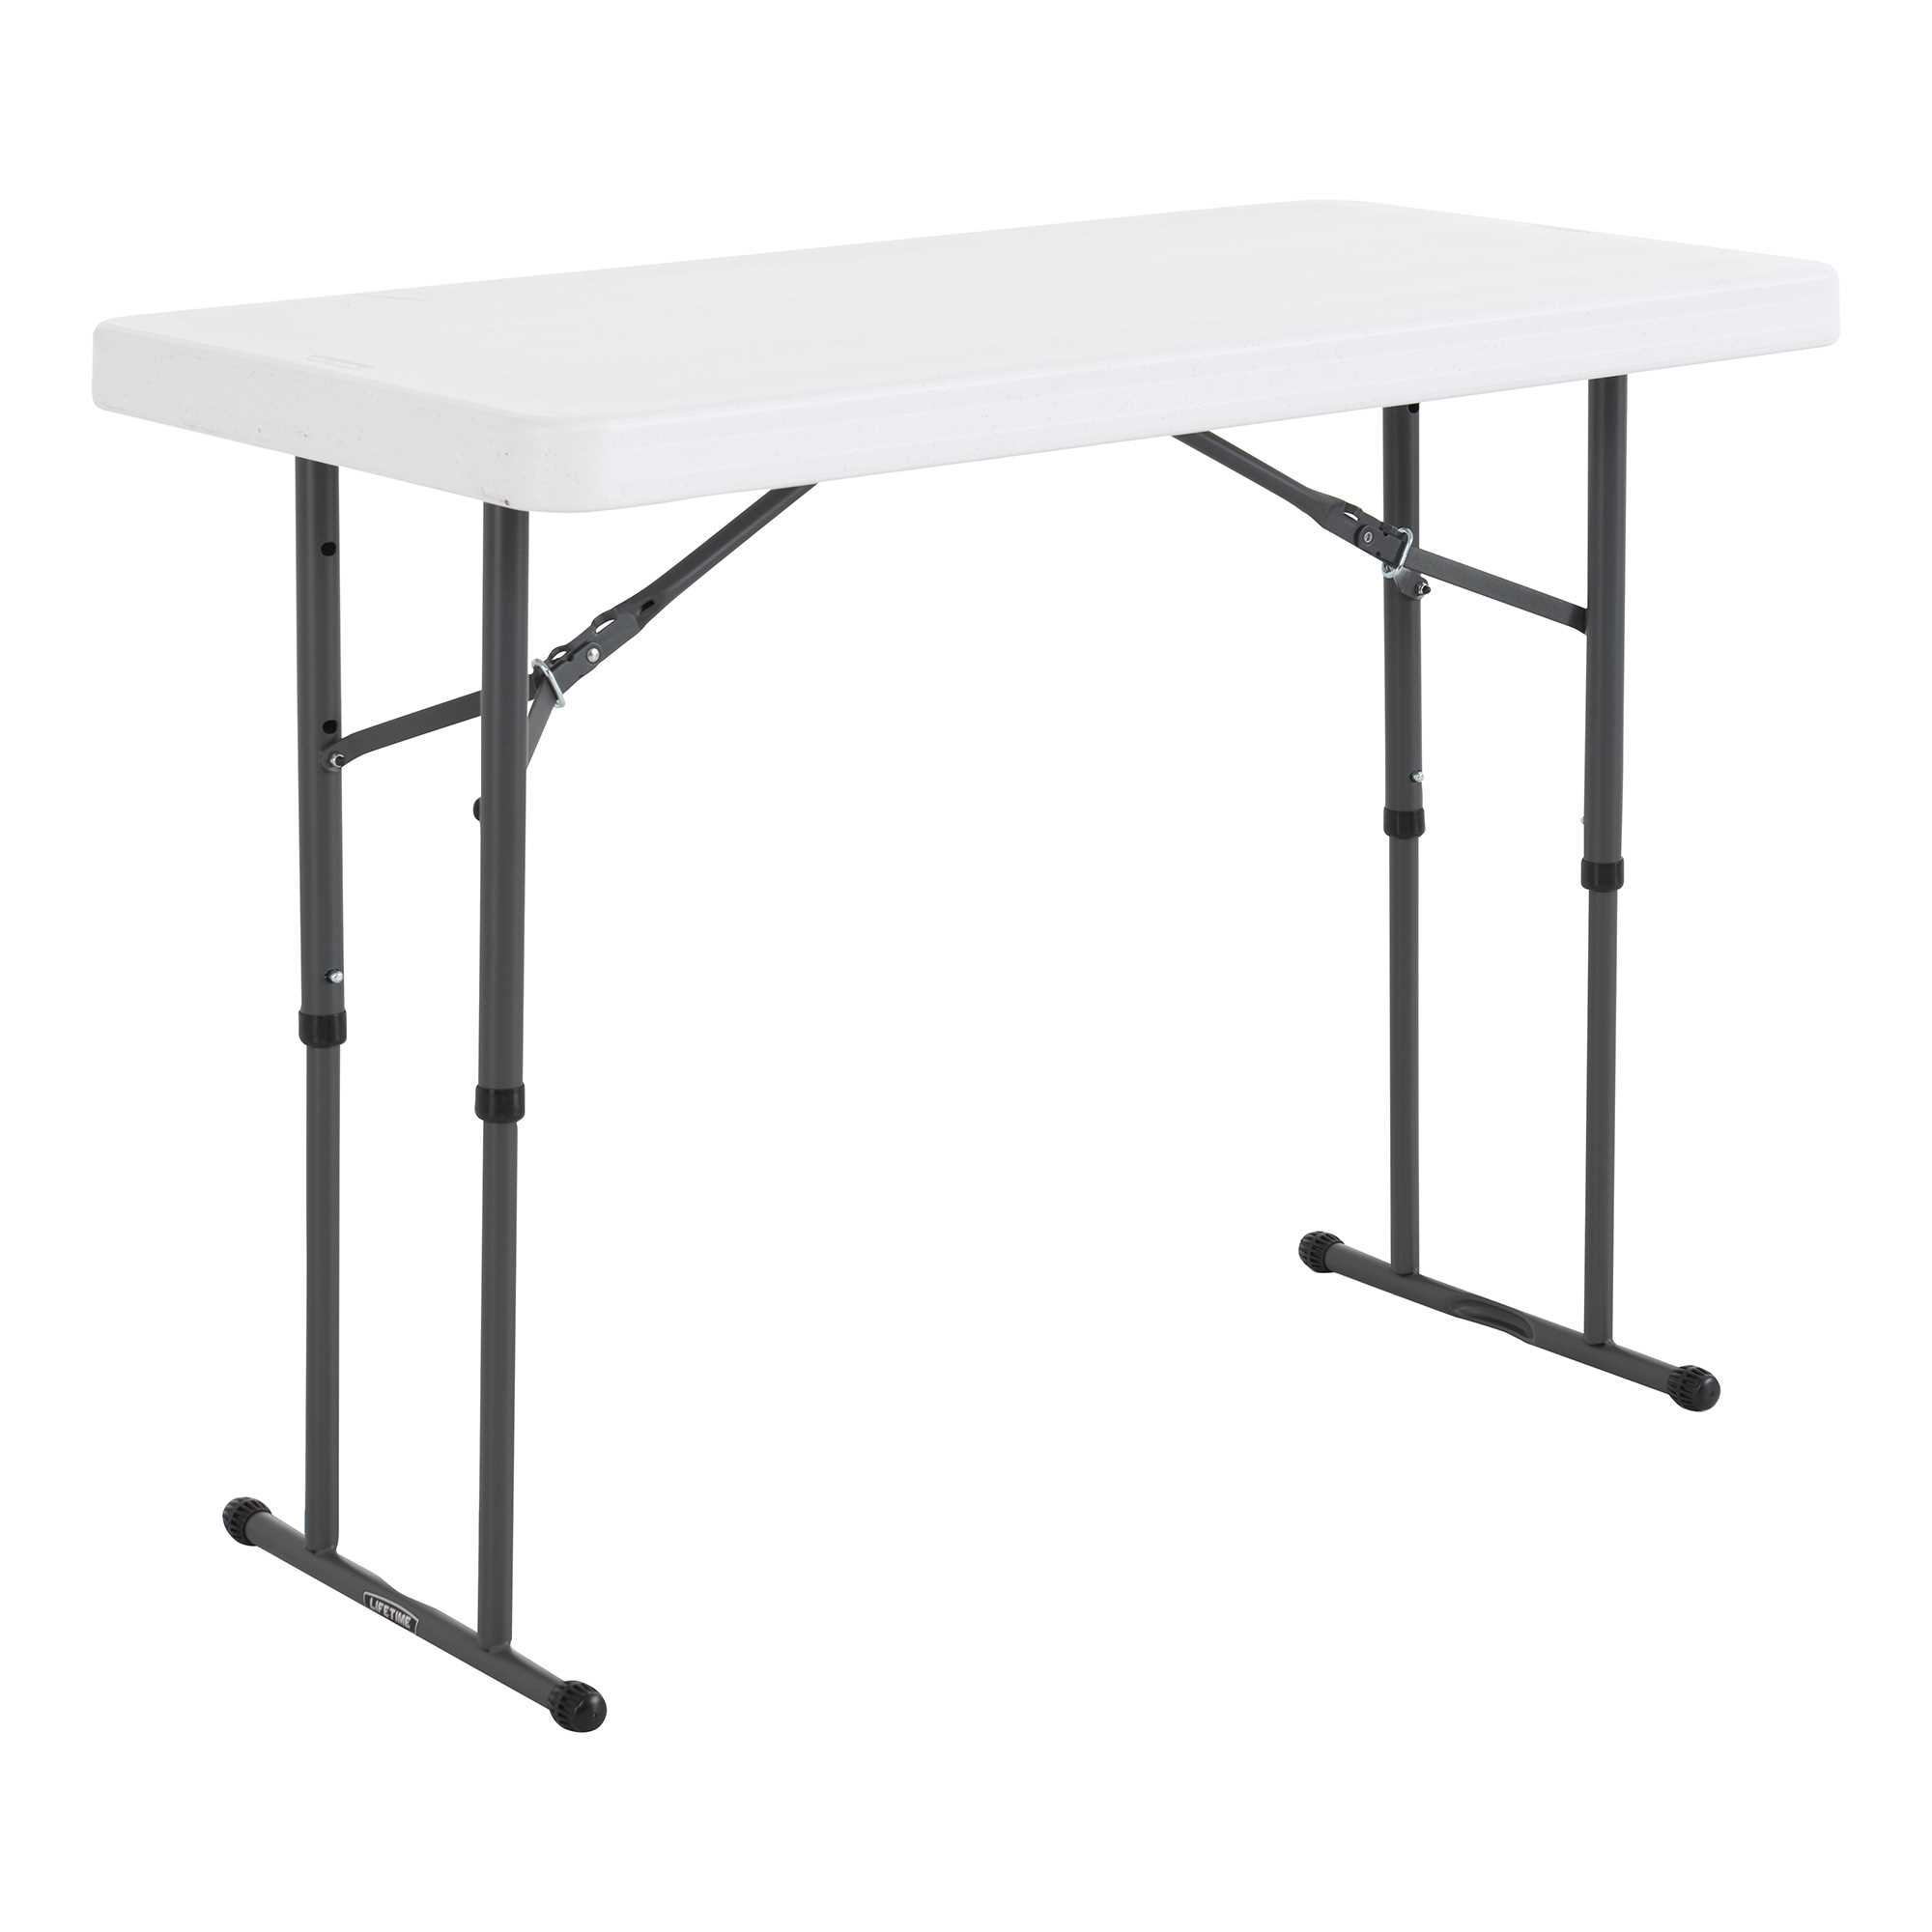 Lifetime 4 Foot Adjustable Rectangle Folding Table, Indoor/Outdoor Commercial Grade, White Granite (80160) - image 1 of 16